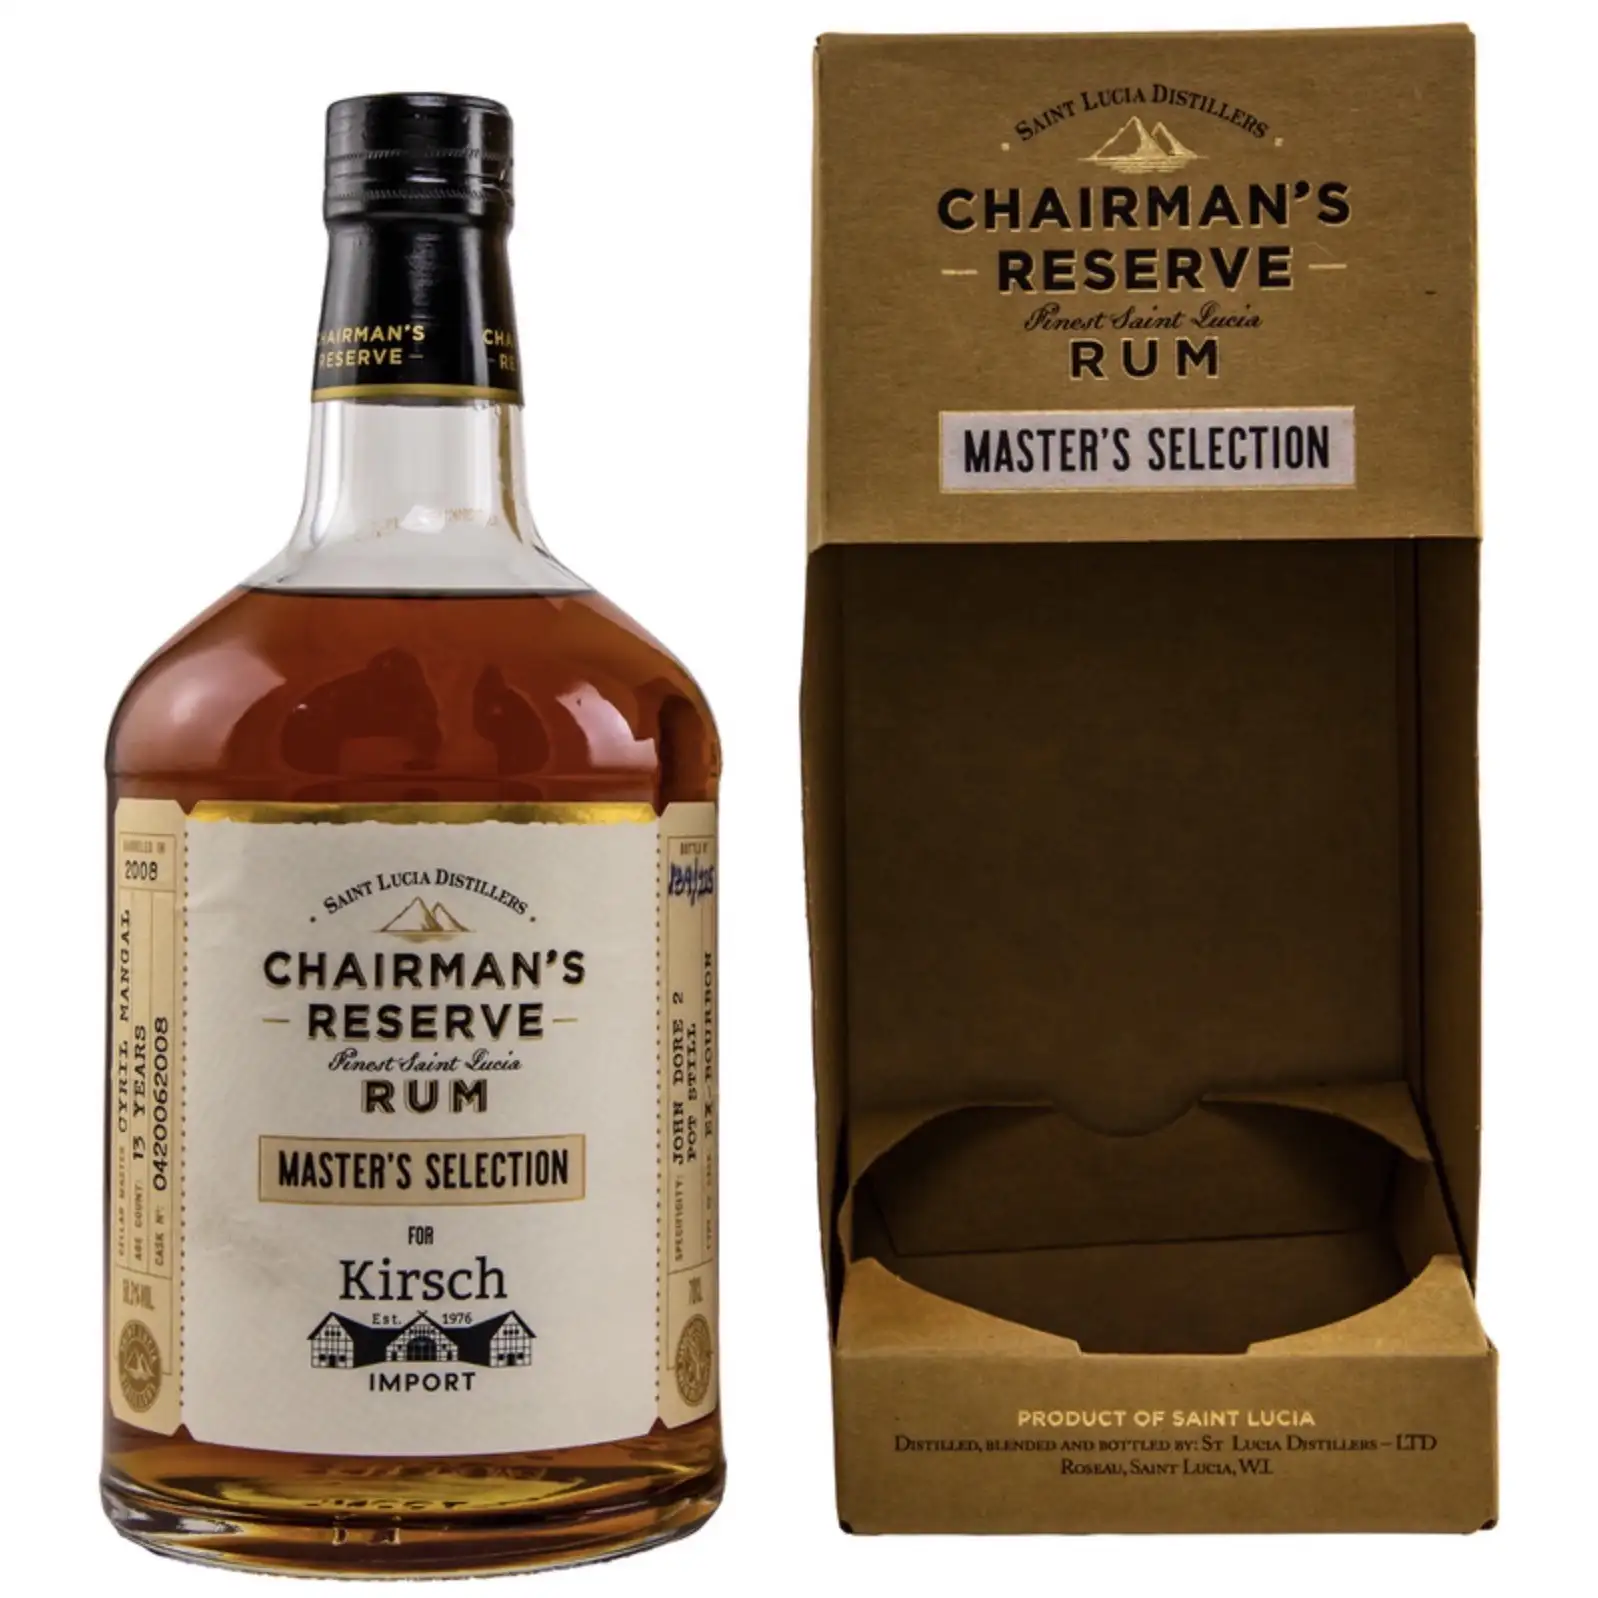 Image of the front of the bottle of the rum Chairman‘s Reserve Master‘s Selection (Kirsch Import)